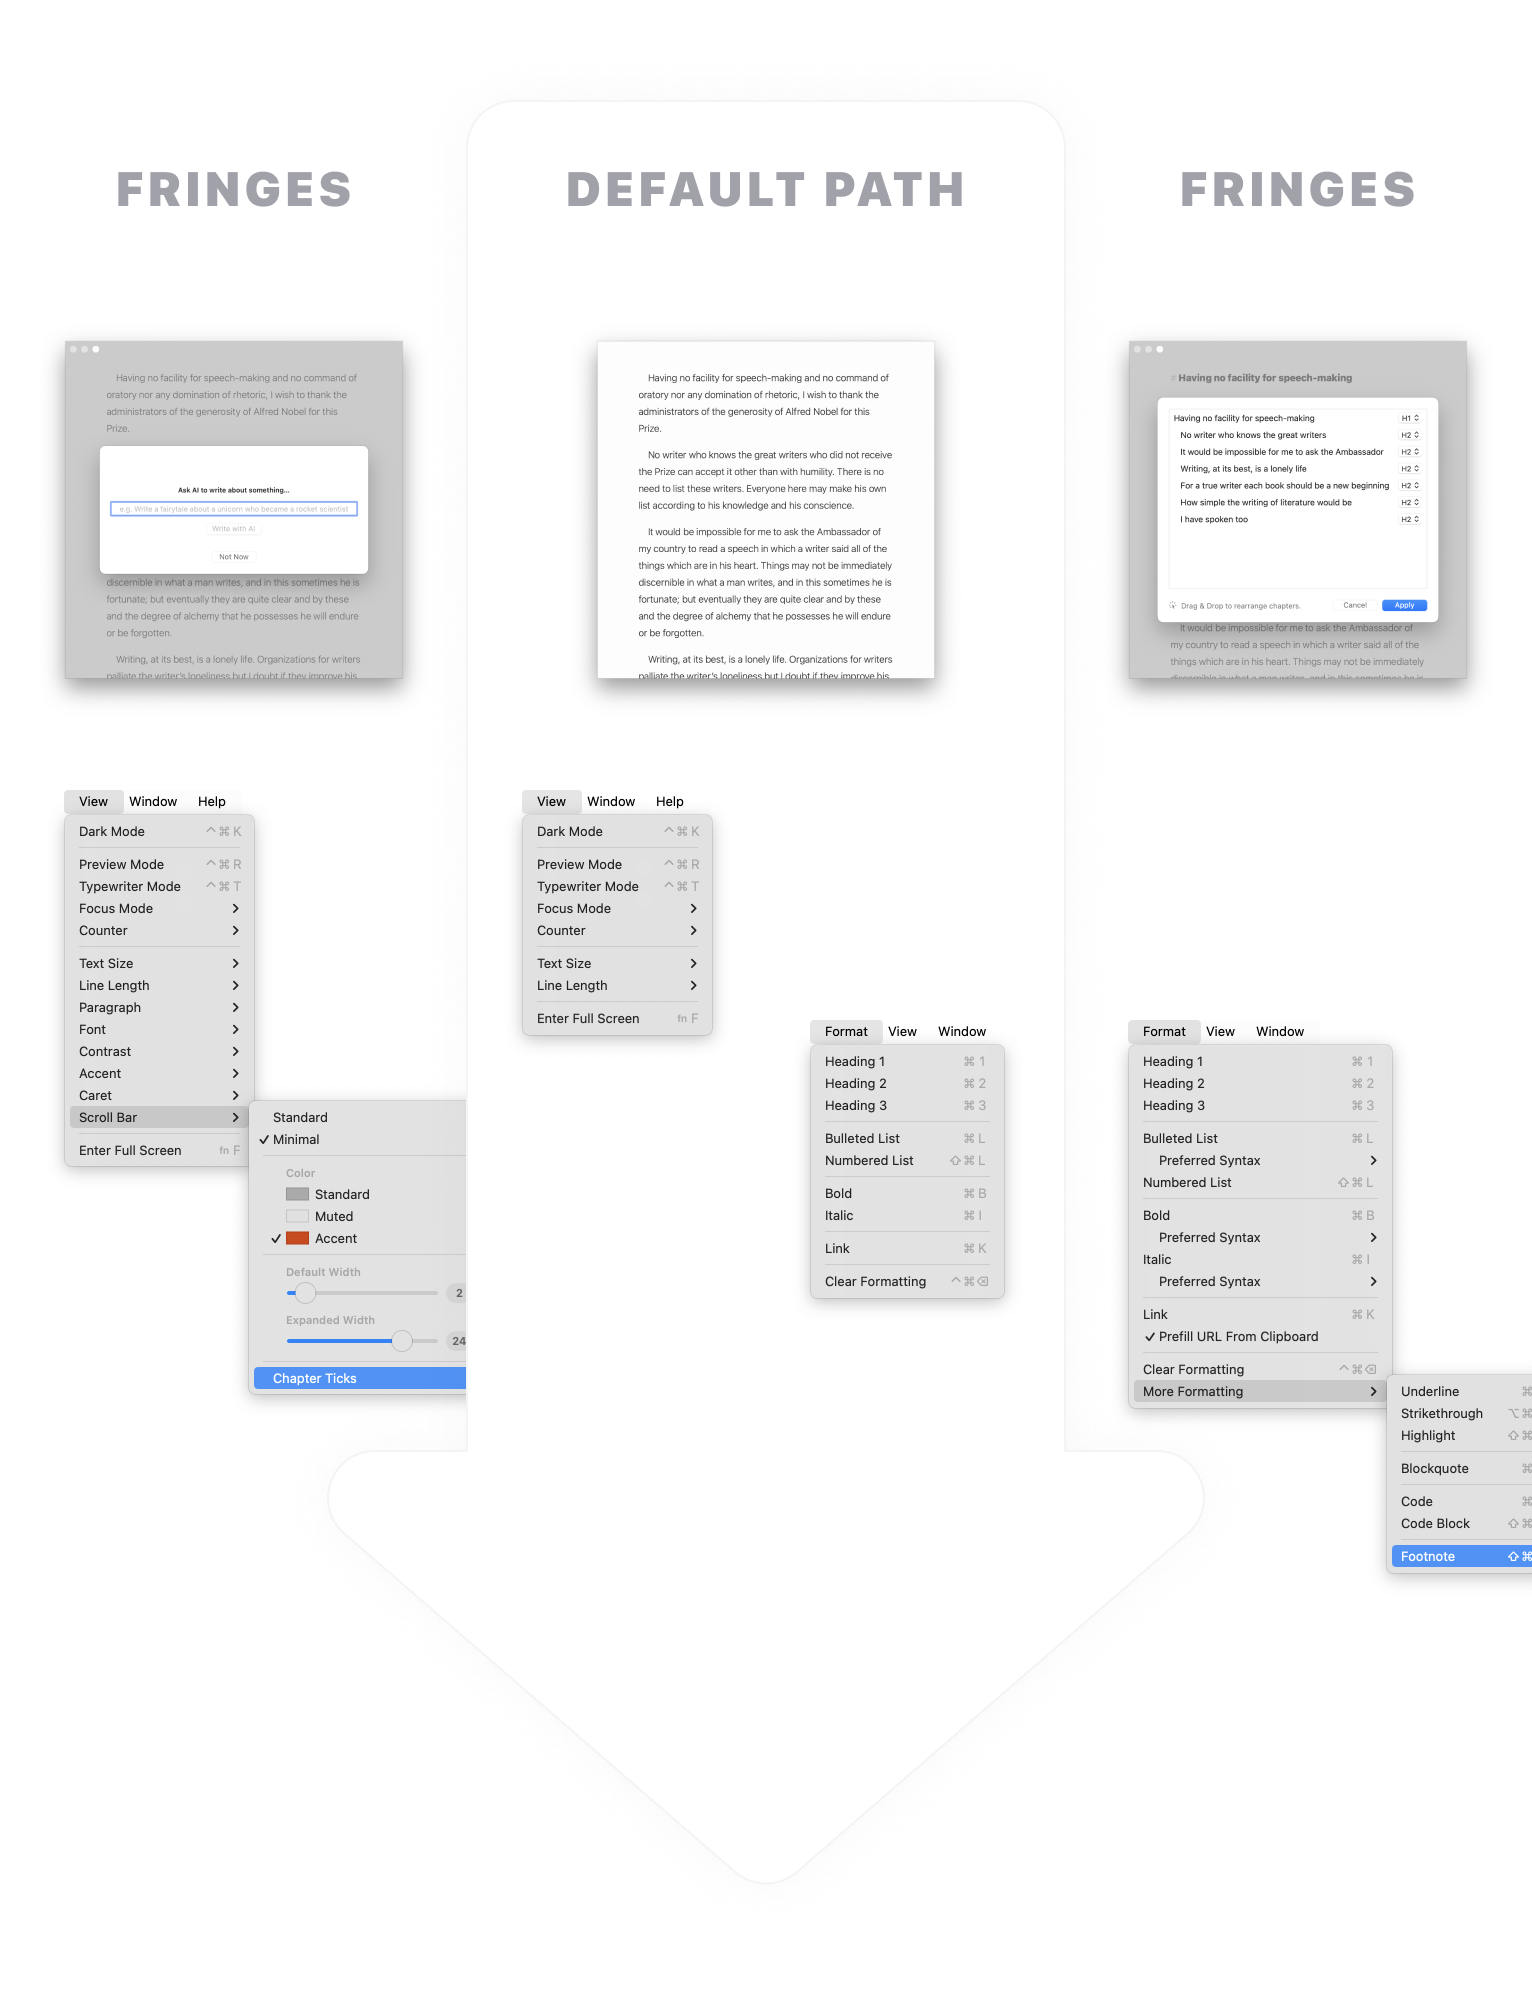 An illustration for the above-mentioned separation of “fringes” and “default path”. In the middle is a big arrow pointing down labeled “default path. It has a bunch of screenshots of the Mac app in it with the default UI state and default menu items. On the sides labeled “fringes” there are a bunch of screenshots with advanced features and additional menu items that become visible when the Option key is pressed.